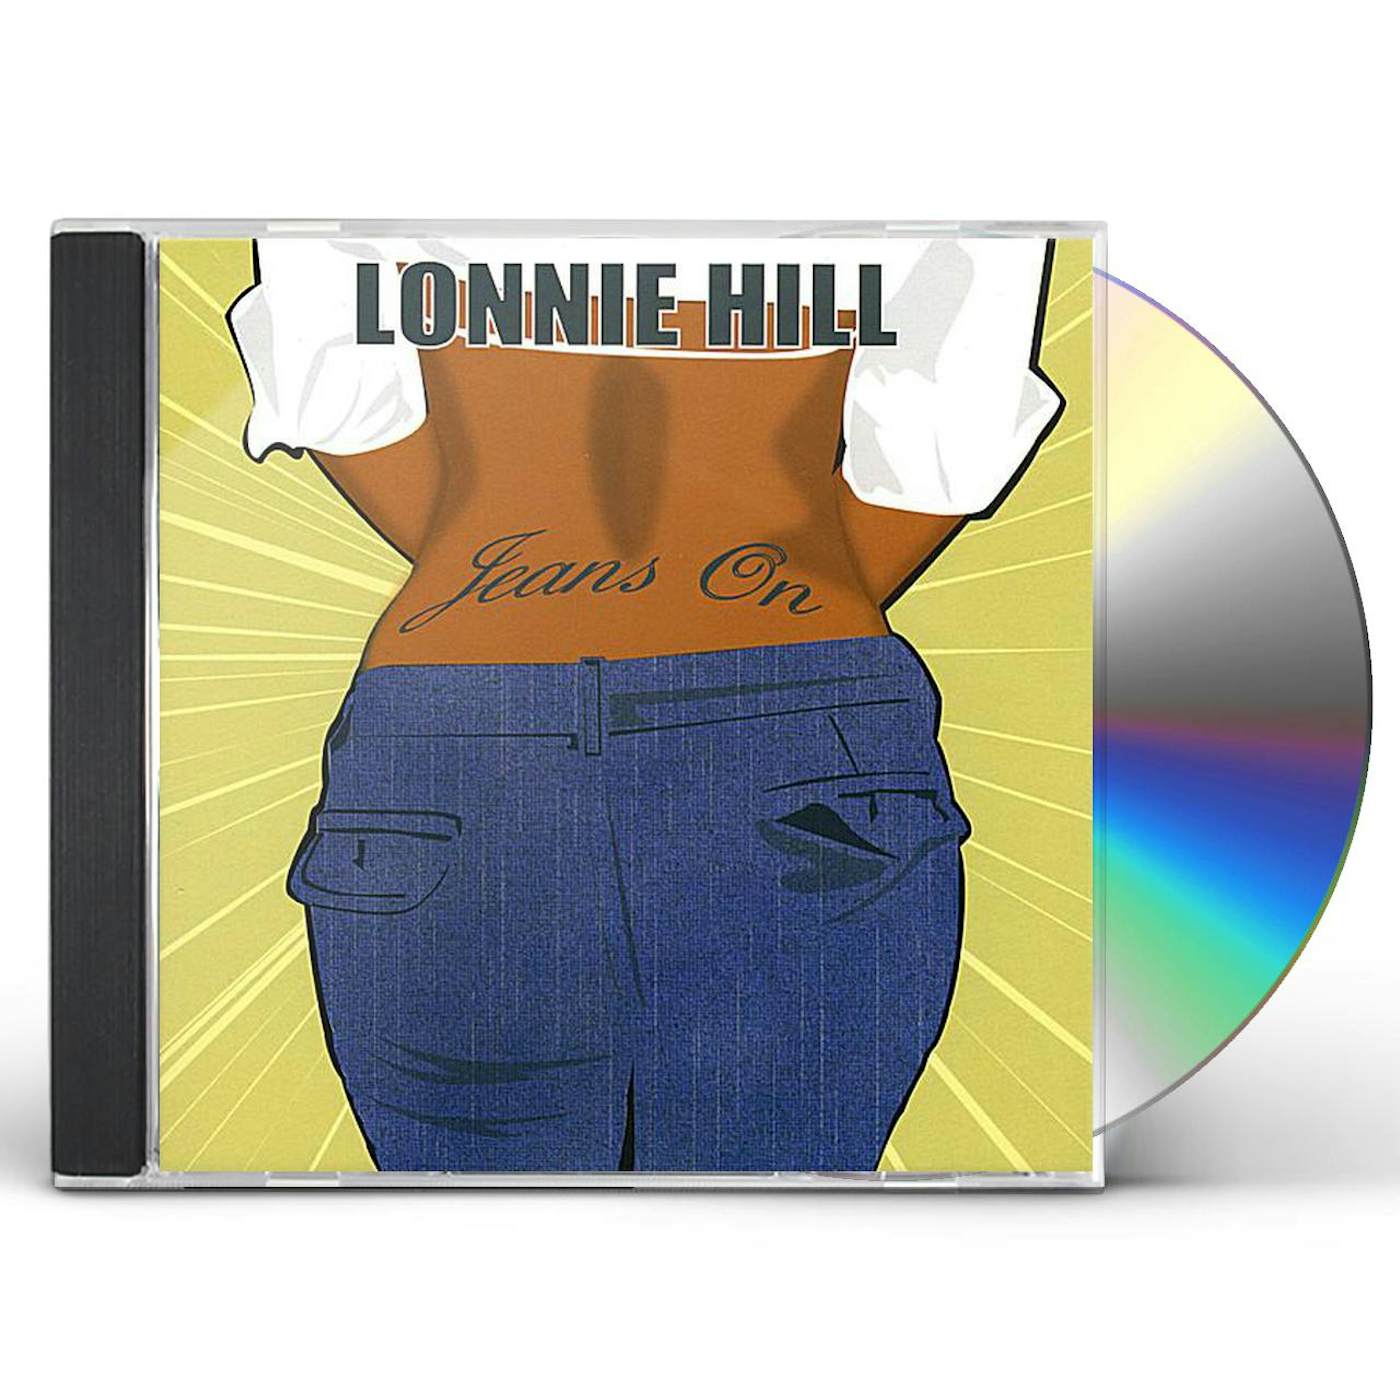 Lonnie Hill JEANS ON CD